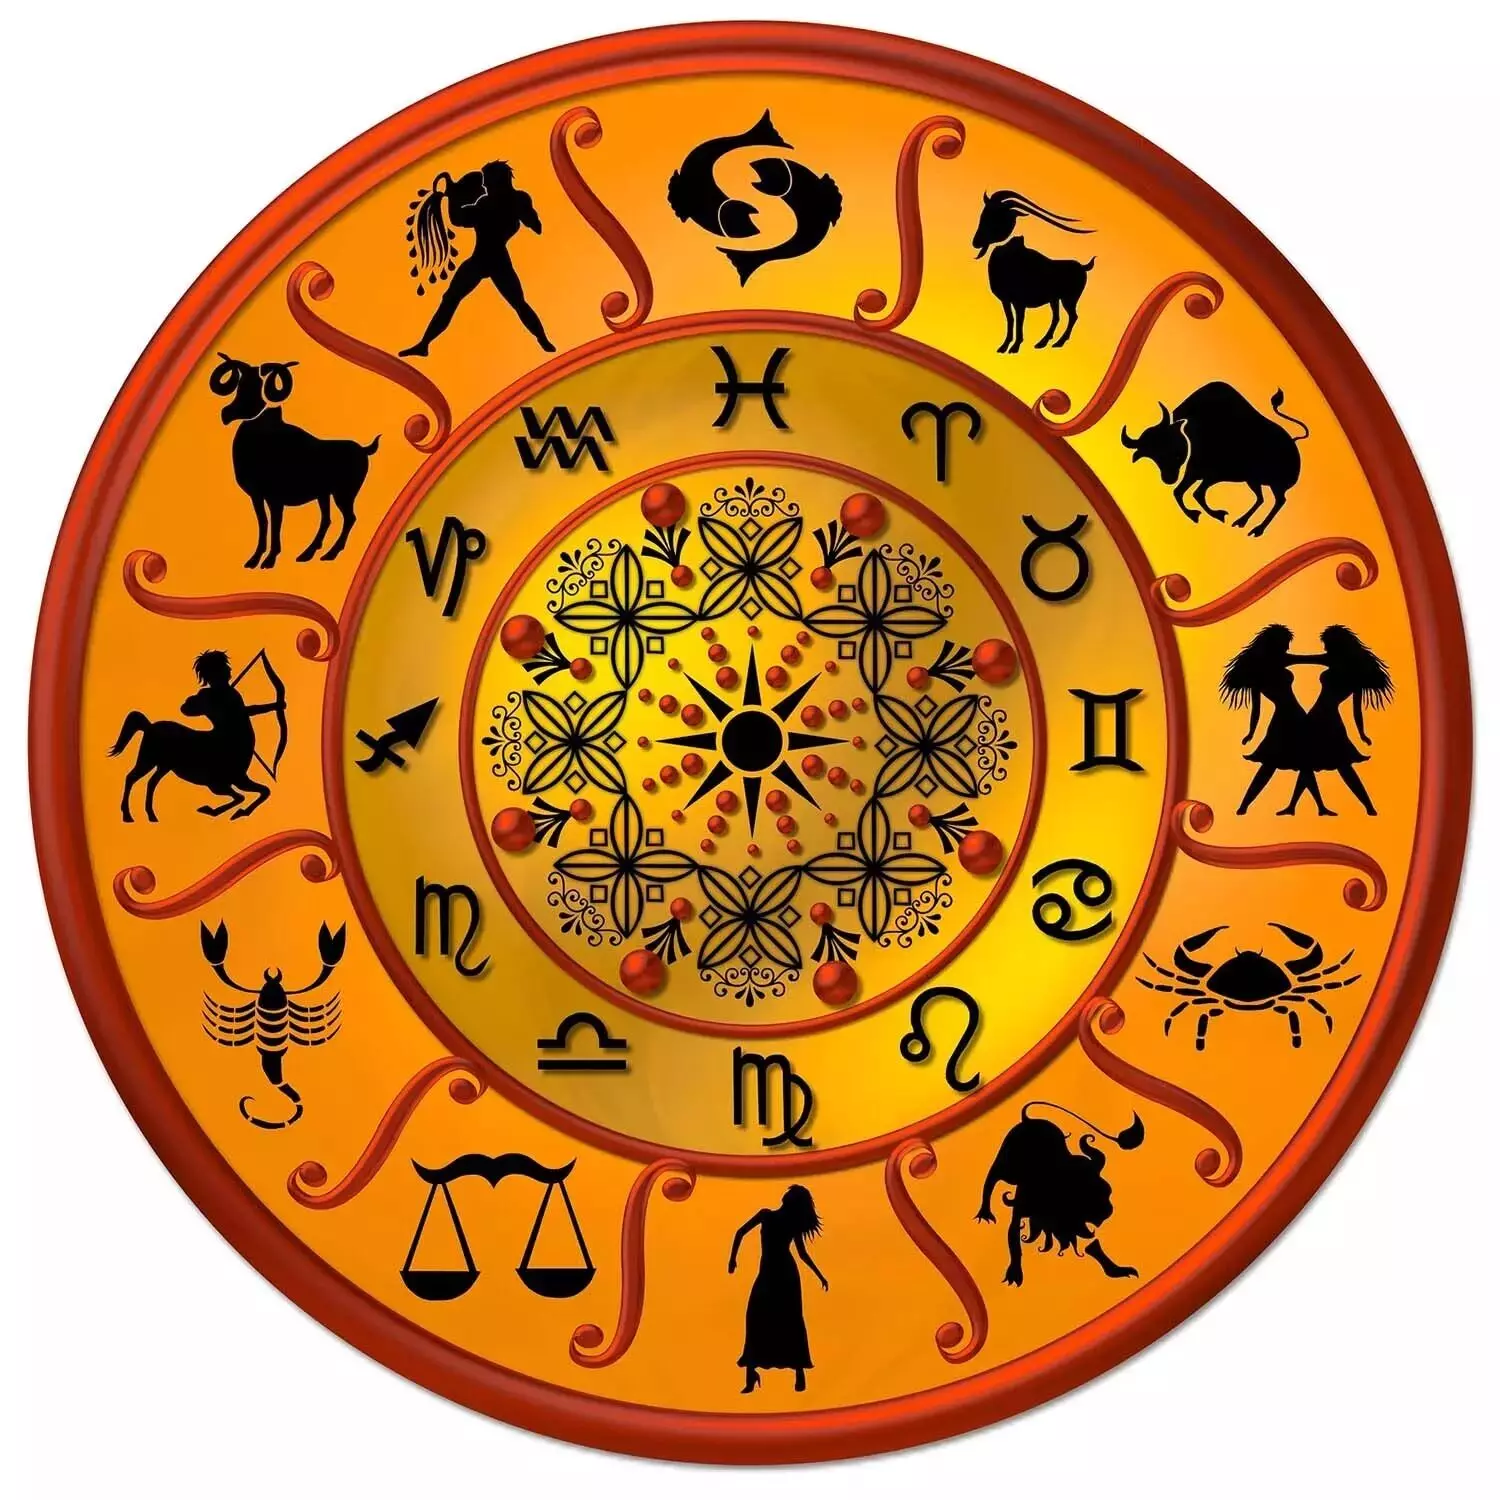 15 April – Know your todays horoscope